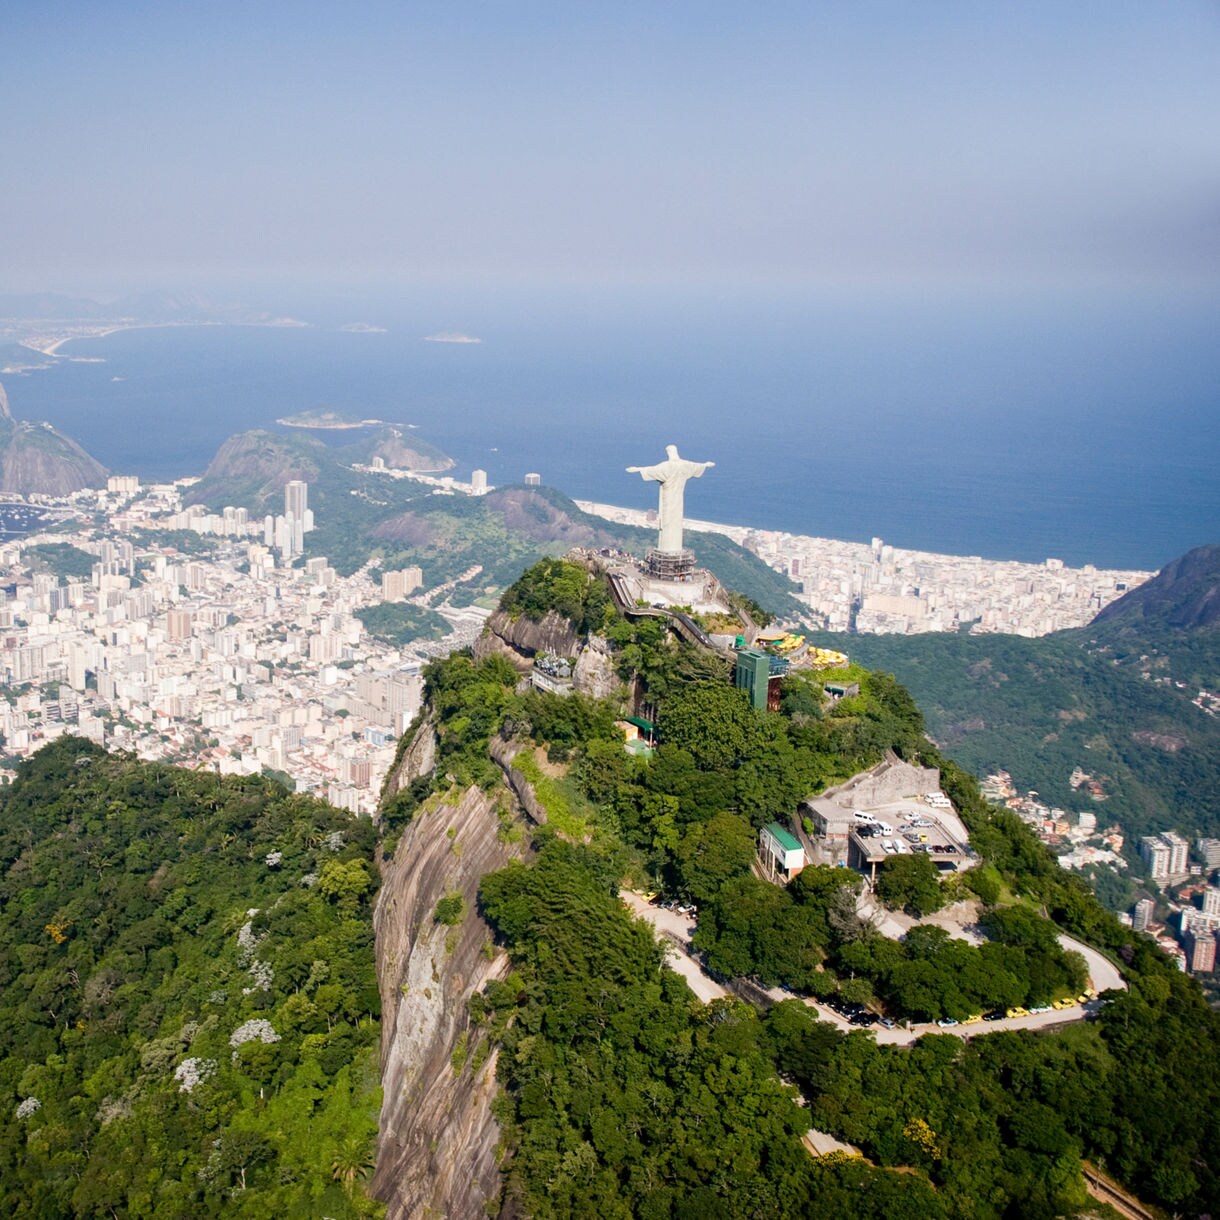 Join in the Meeting of Cultures in Salvador, Brazil - Princess Cruises